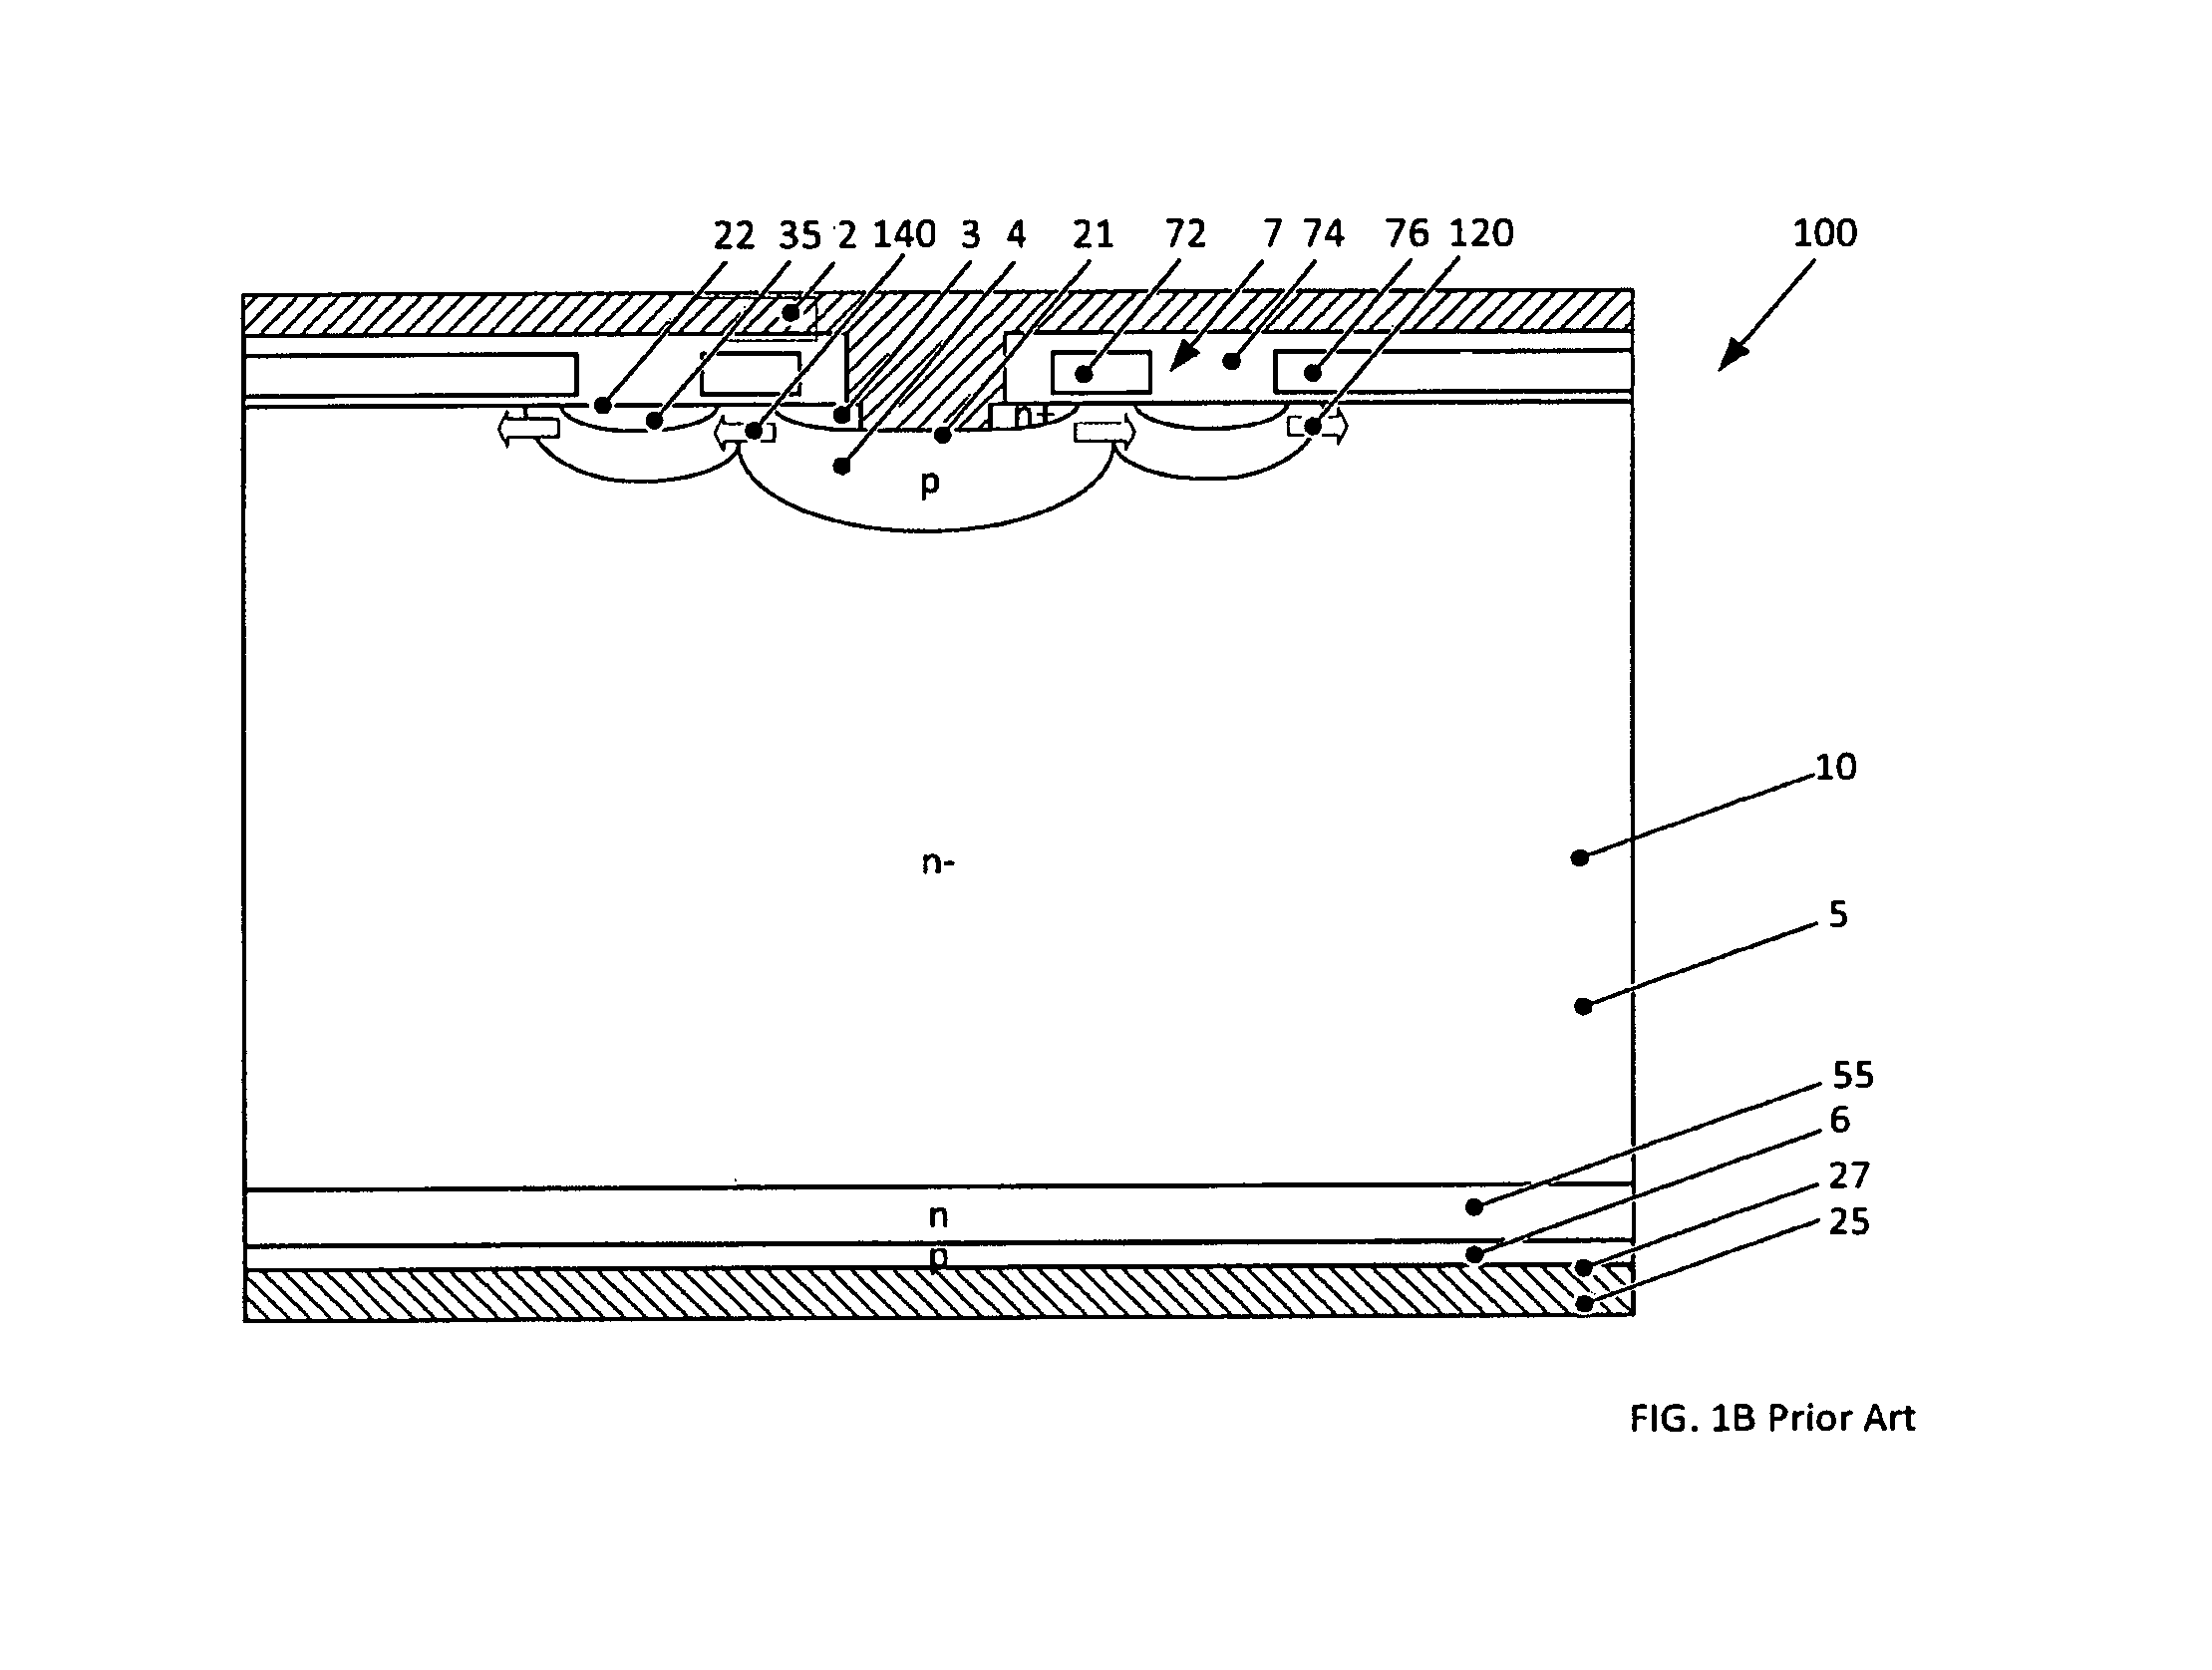 Power semiconductor device and corresponding module